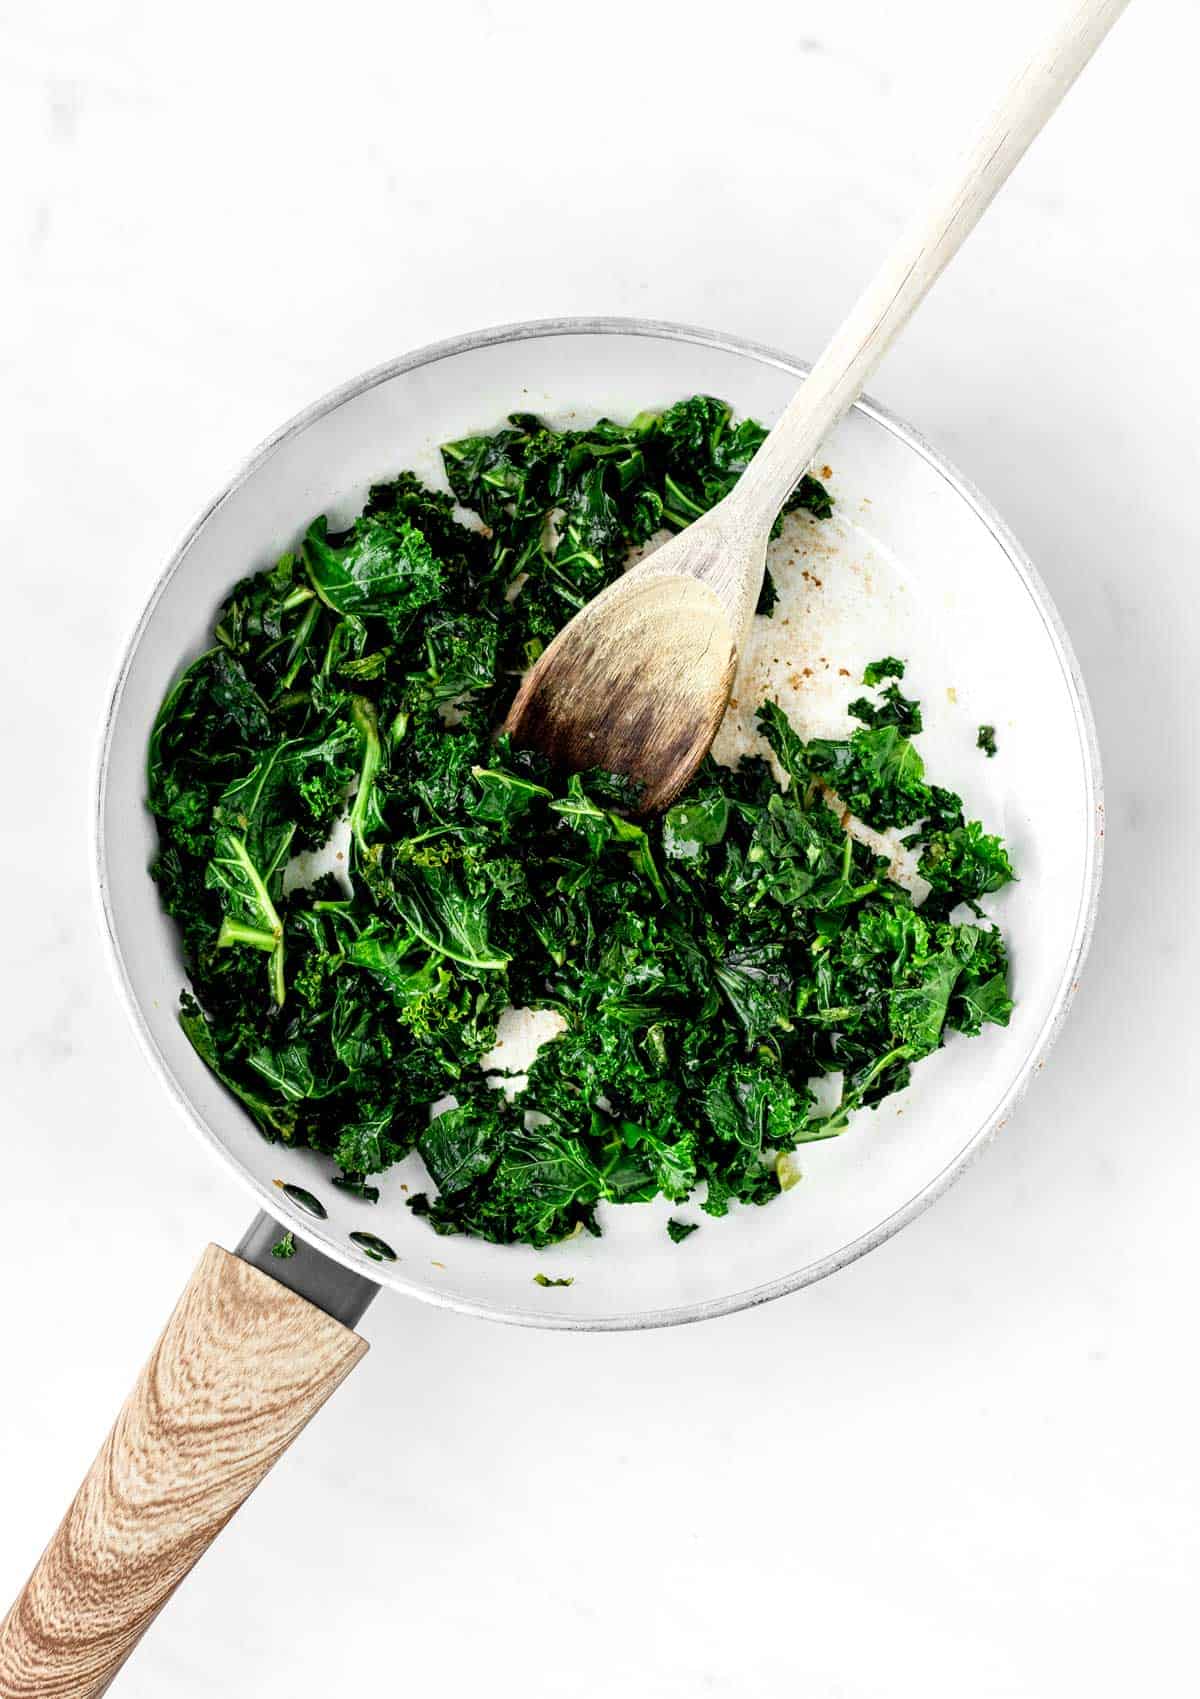 Cooking kale in a frying pan, until soft and fragrant.